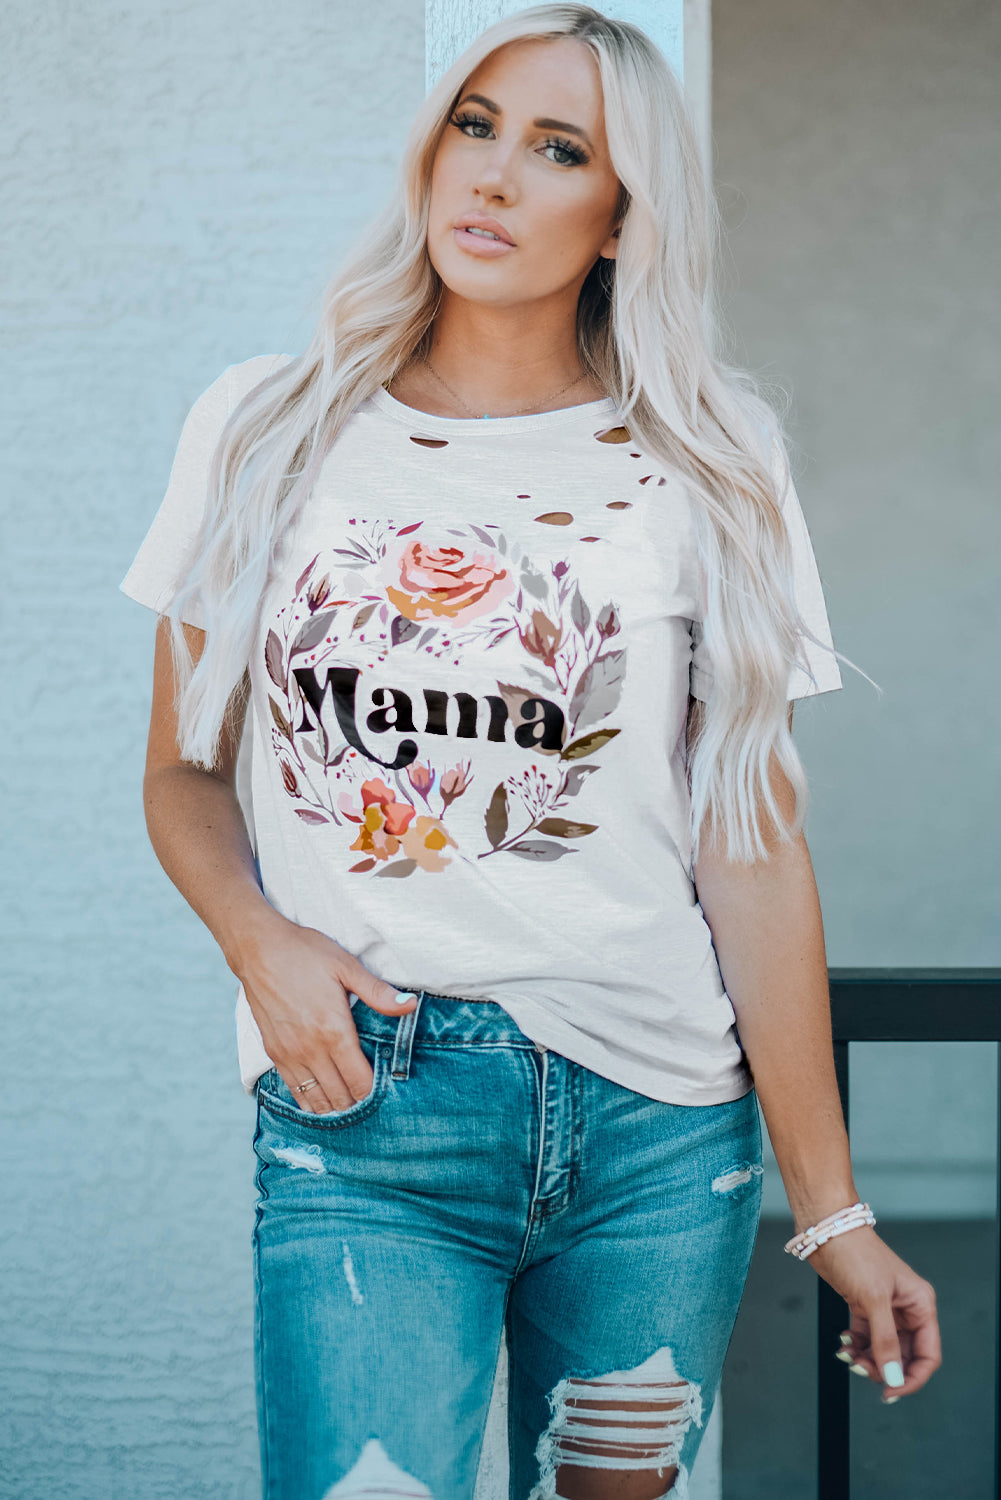 Distressed Cutout MAMA Floral Graphic Tee Shirt (Plus Size Available)